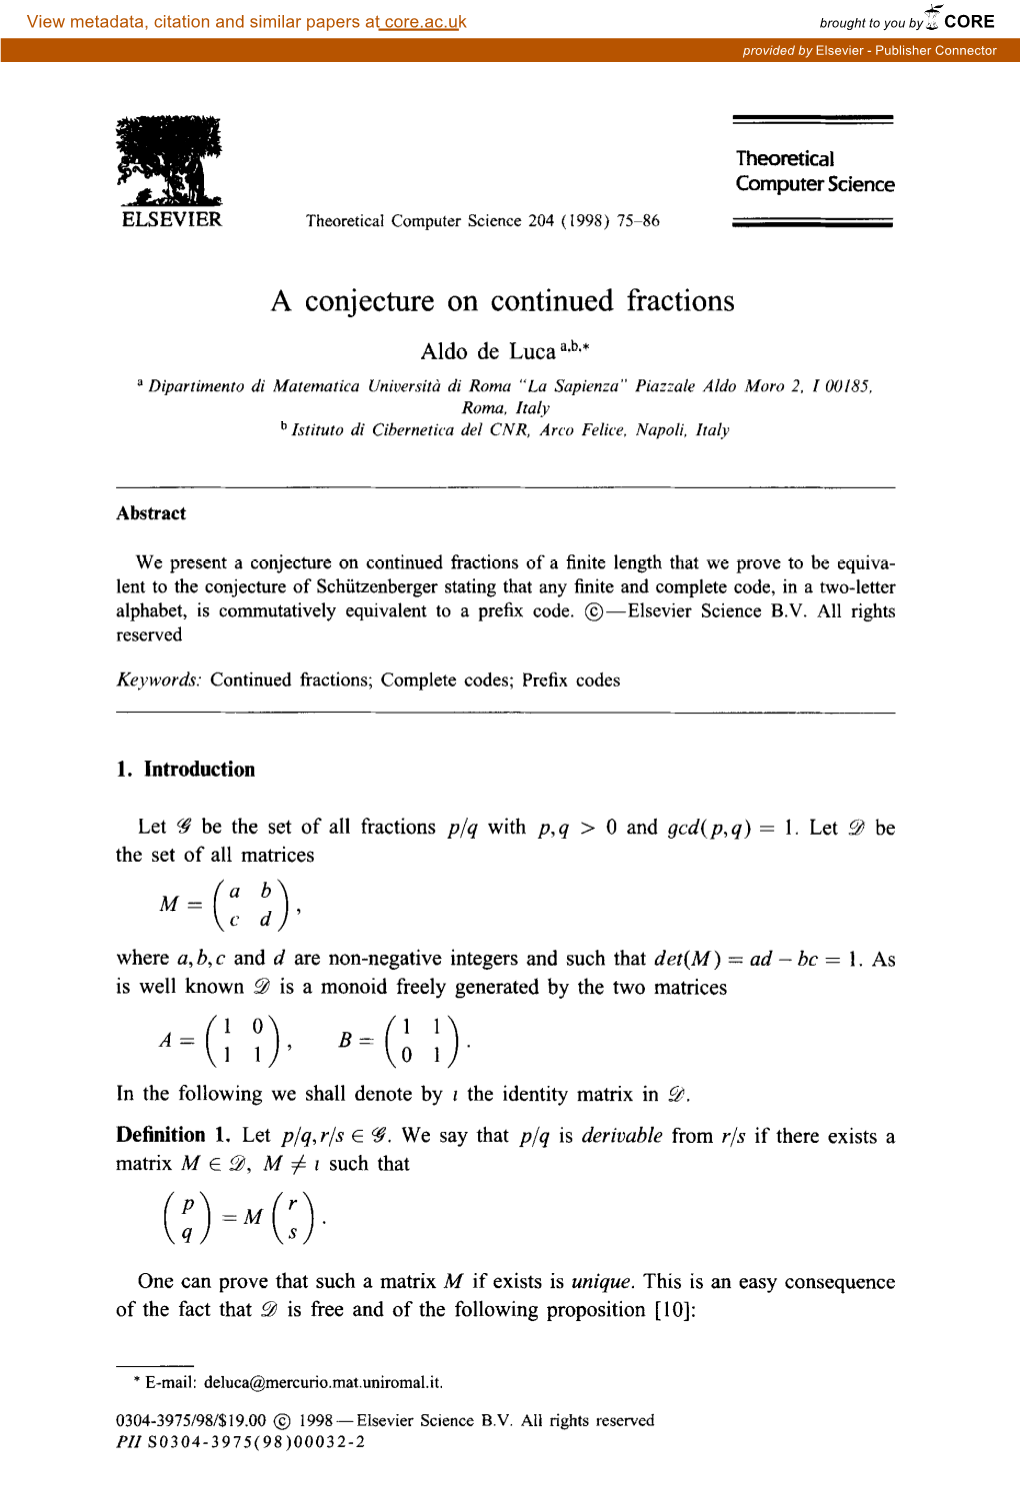 A Conjecture on Continued Fractions